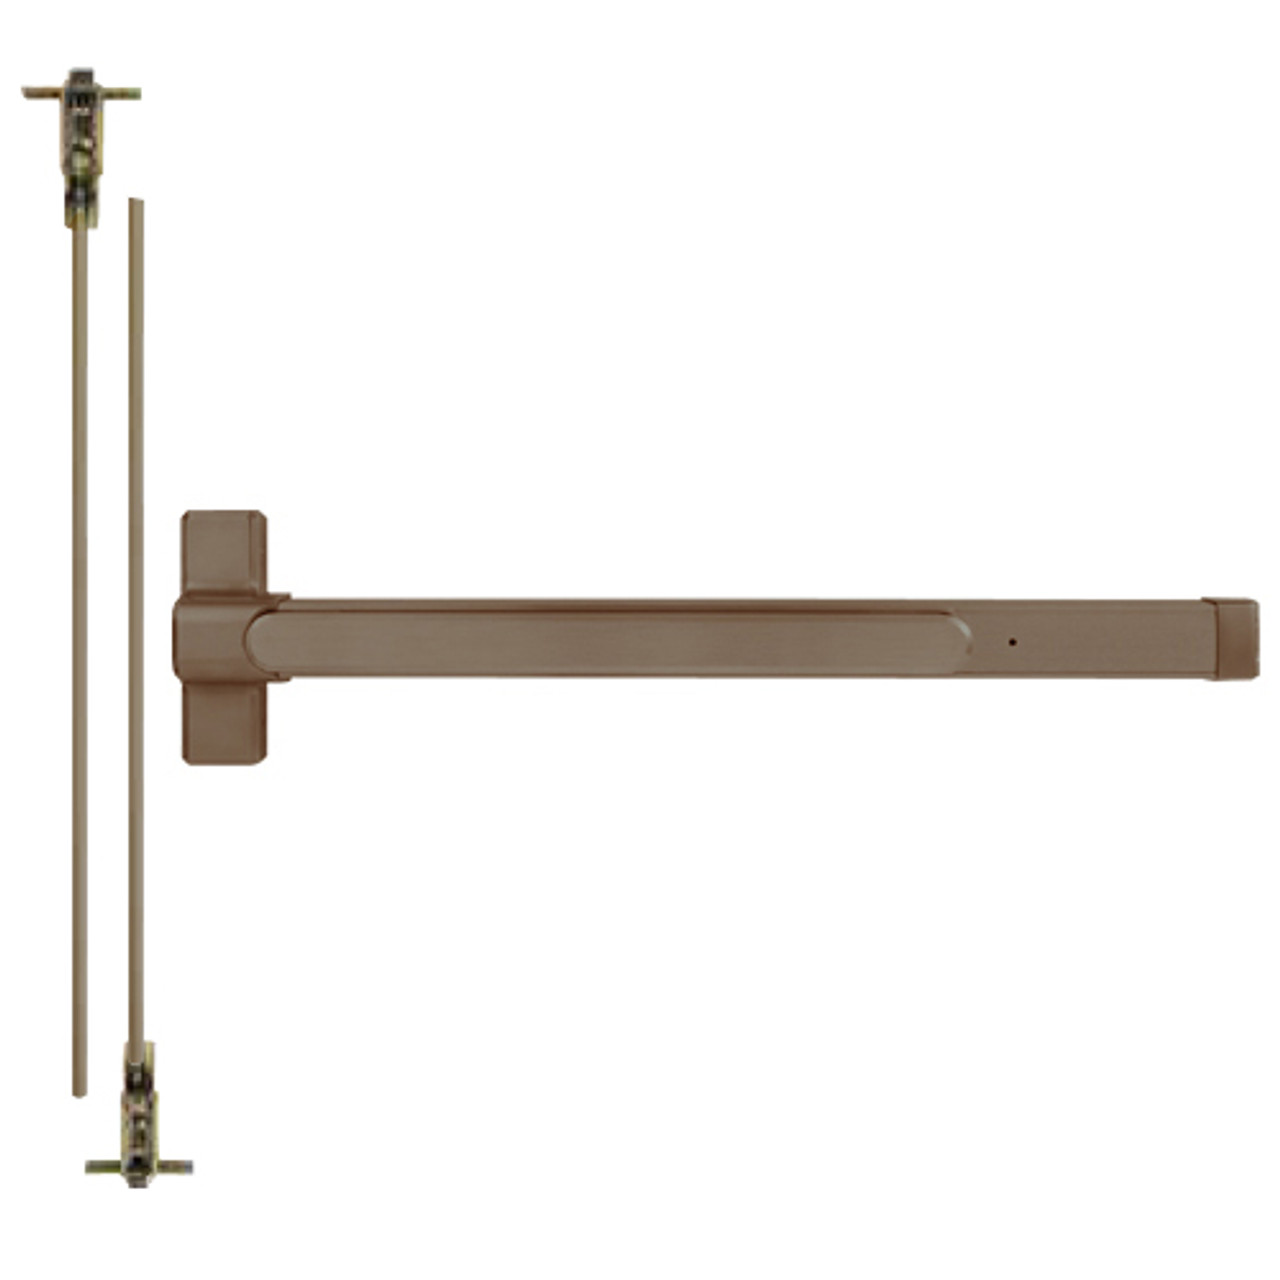 QED125X-48-7-313AN-LC Stanley QED100 Series Heavy Duty Concealed Vertical Rod Cylinder Dog Exit Device in Anodized Duranodic Bronze Finish